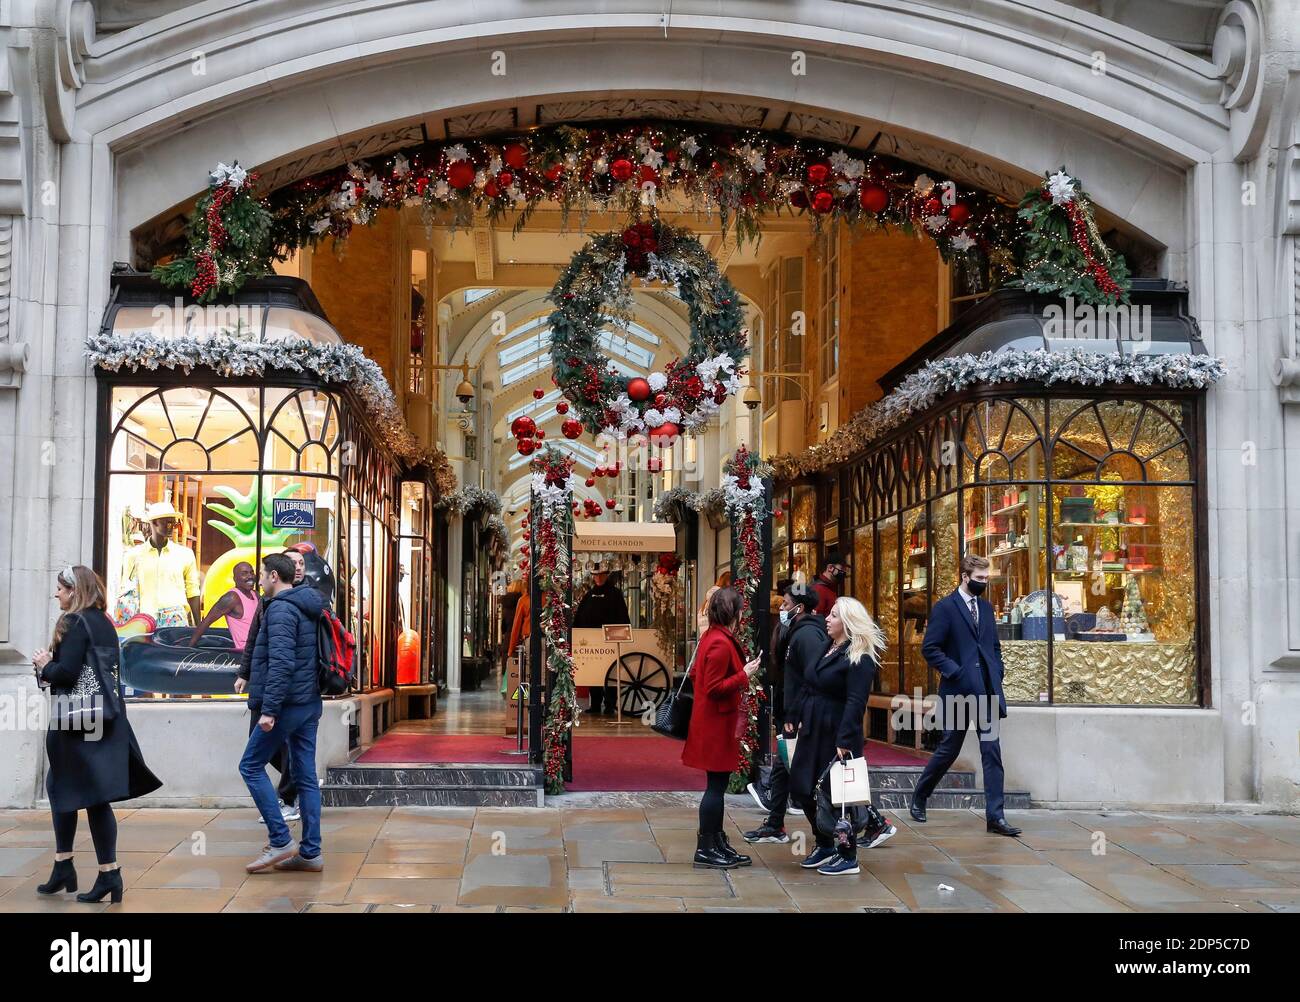 London, Britain. 18th Dec, 2020. People walk past Burlington Arcade on Piccadilly in London, Britain, on Dec. 18, 2020. Britain's coronavirus reproduction number, also known as the R number, has risen to between 1.1 and 1.2 from between 0.9 and 1.0 last week, the British government's Scientific Advisory Group for Emergencies (SAGE) said Friday. The R number is one of many indicators scientists use to determine how fast COVID-19 is spreading in the country. If the R number is above one, it means the number of cases will increase exponentially. Credit: Han Yan/Xinhua/Alamy Live News Stock Photo